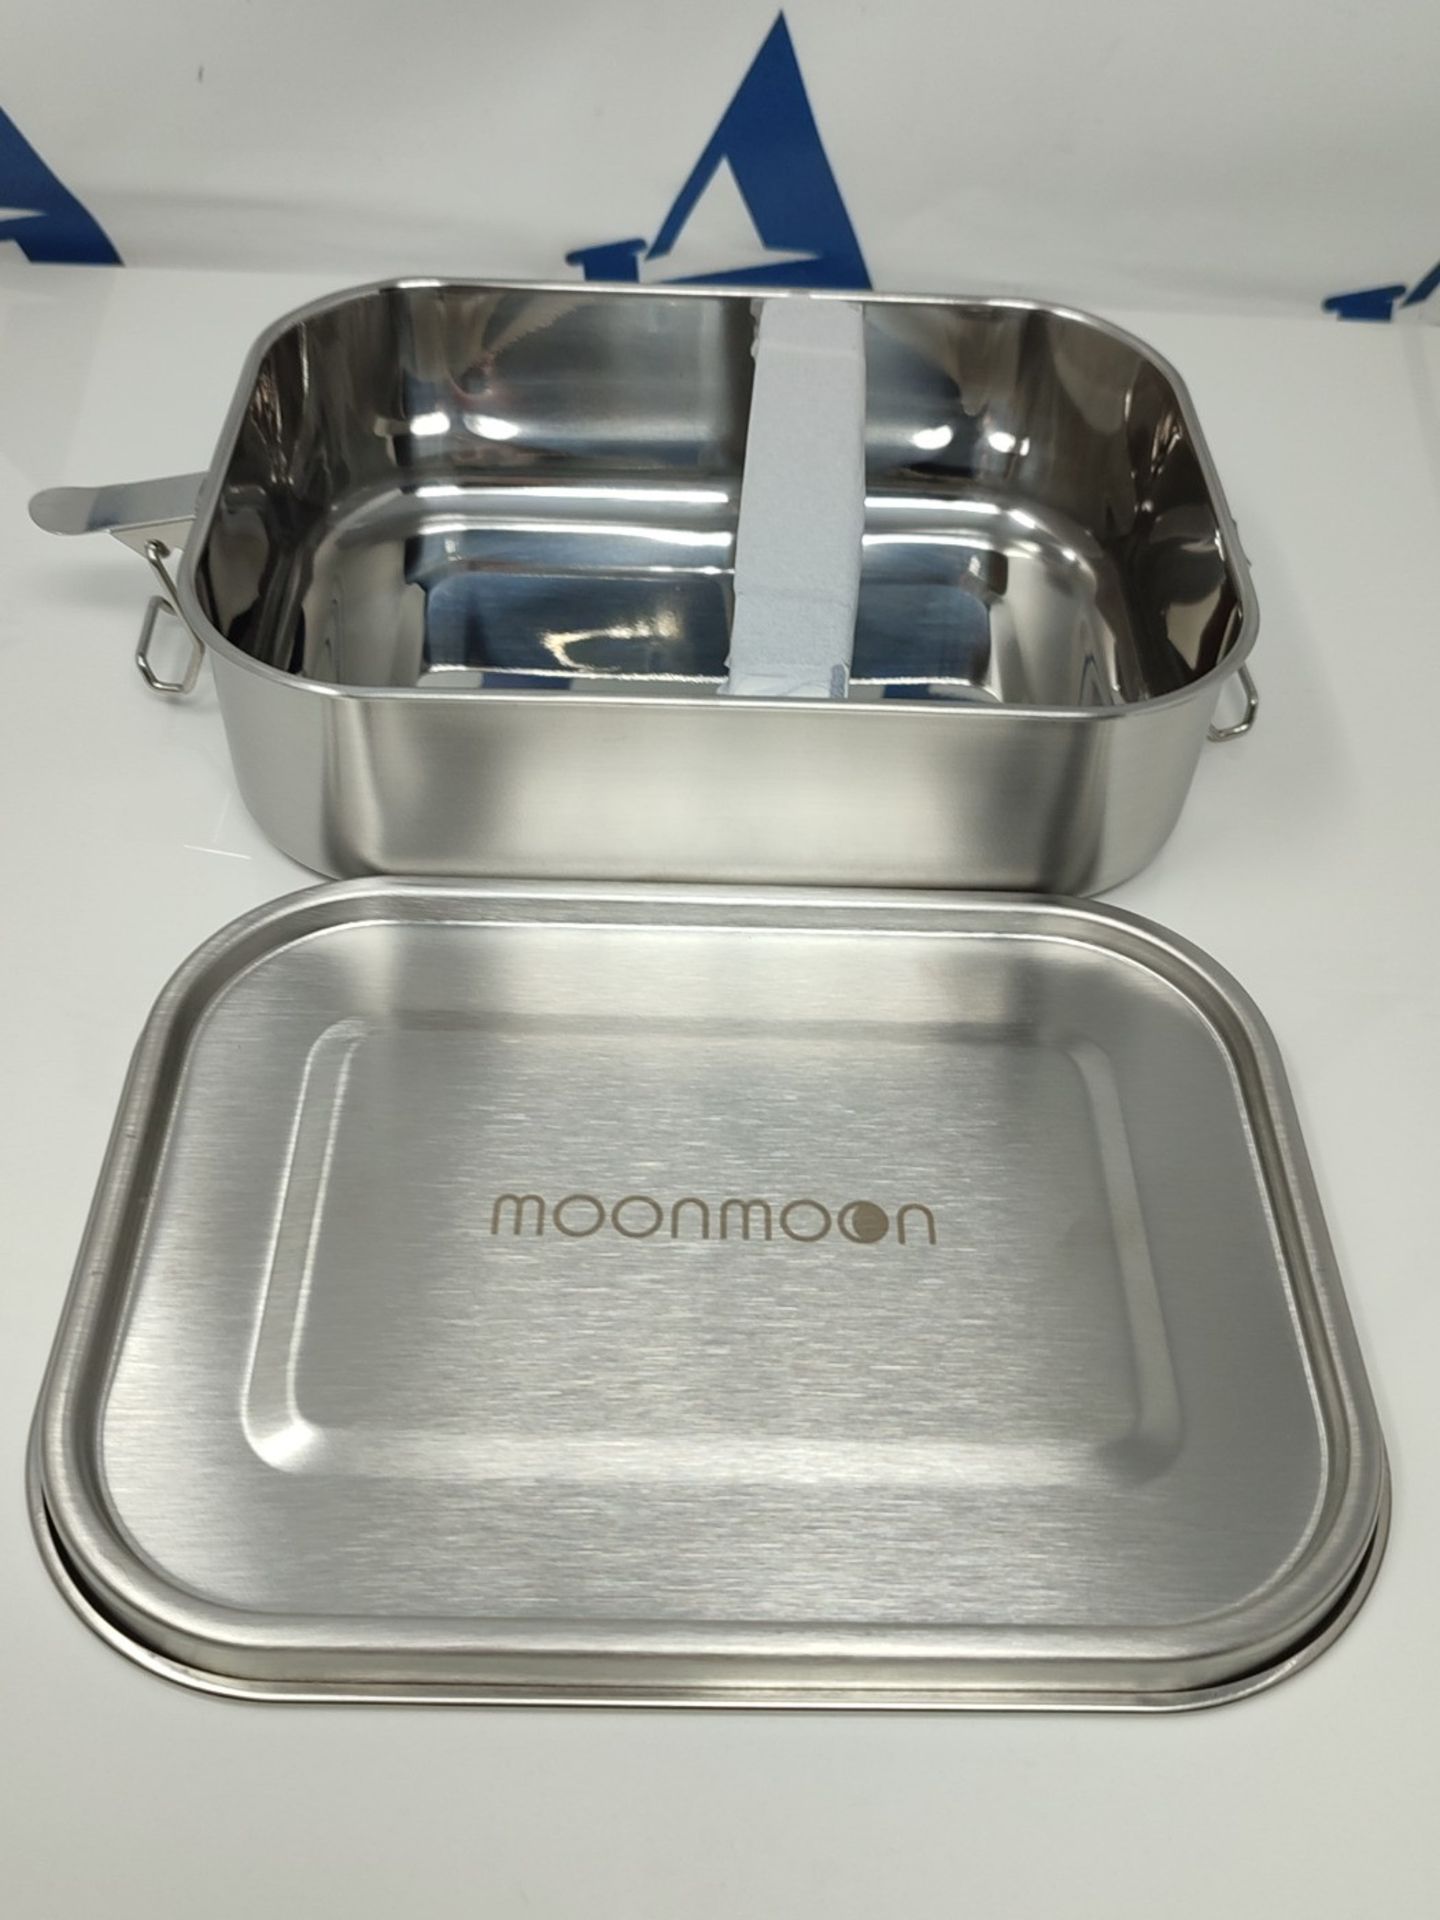 Moonmoon Stainless Steel Lunch Box | Eco-Friendly 1.2 Litre Leakproof Bento Box with c - Image 5 of 12